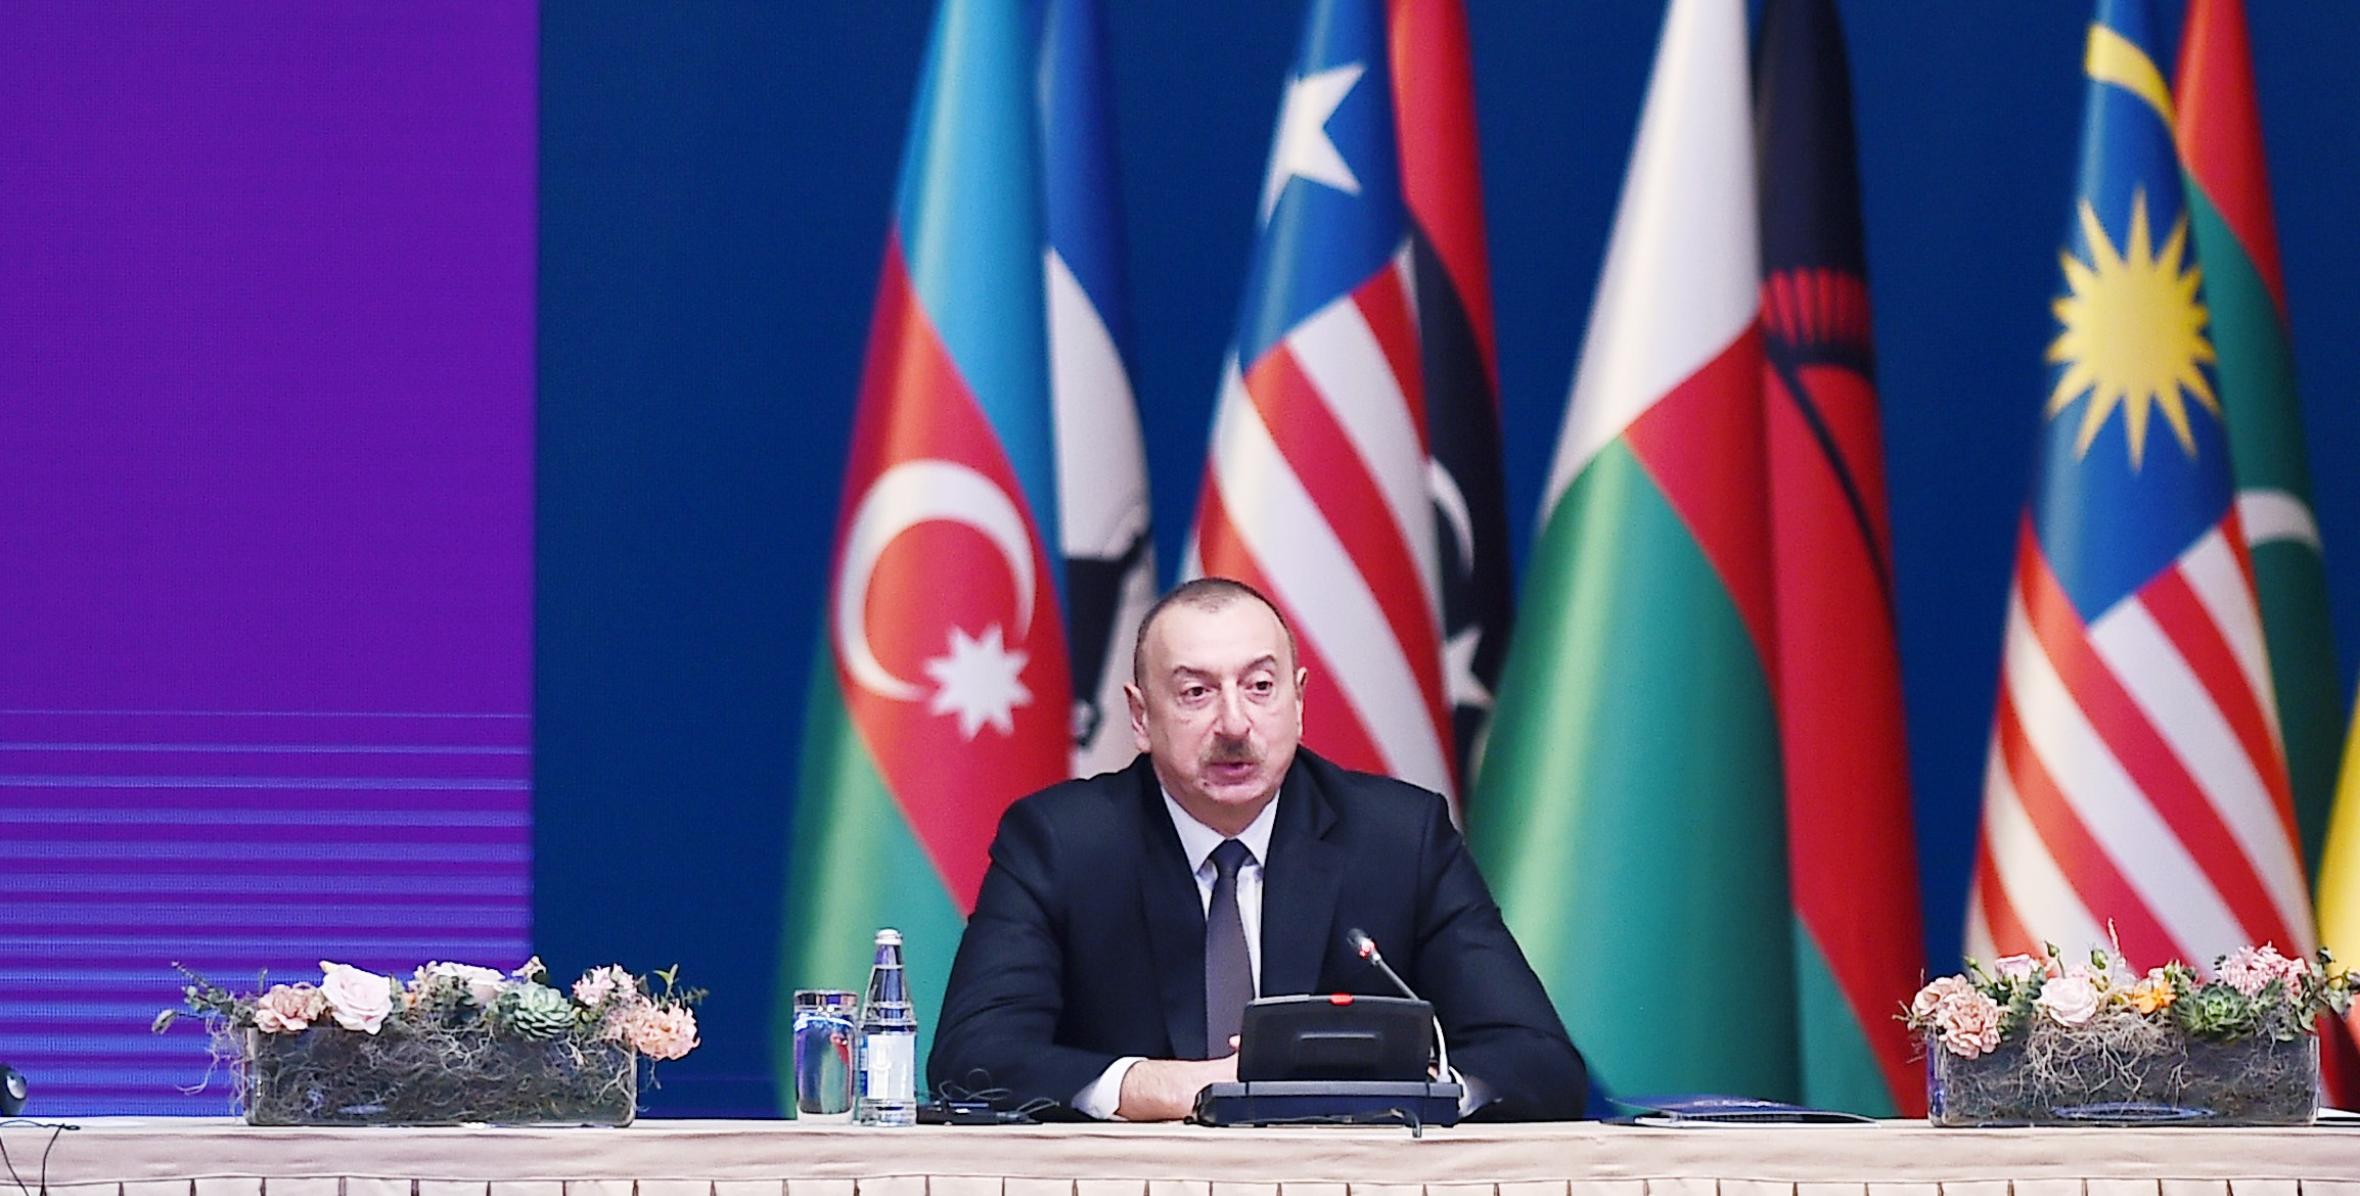 Speech by Ilham Aliyev at the opening ceremony of Mid-Term Ministerial Conference of Non-Aligned Movement